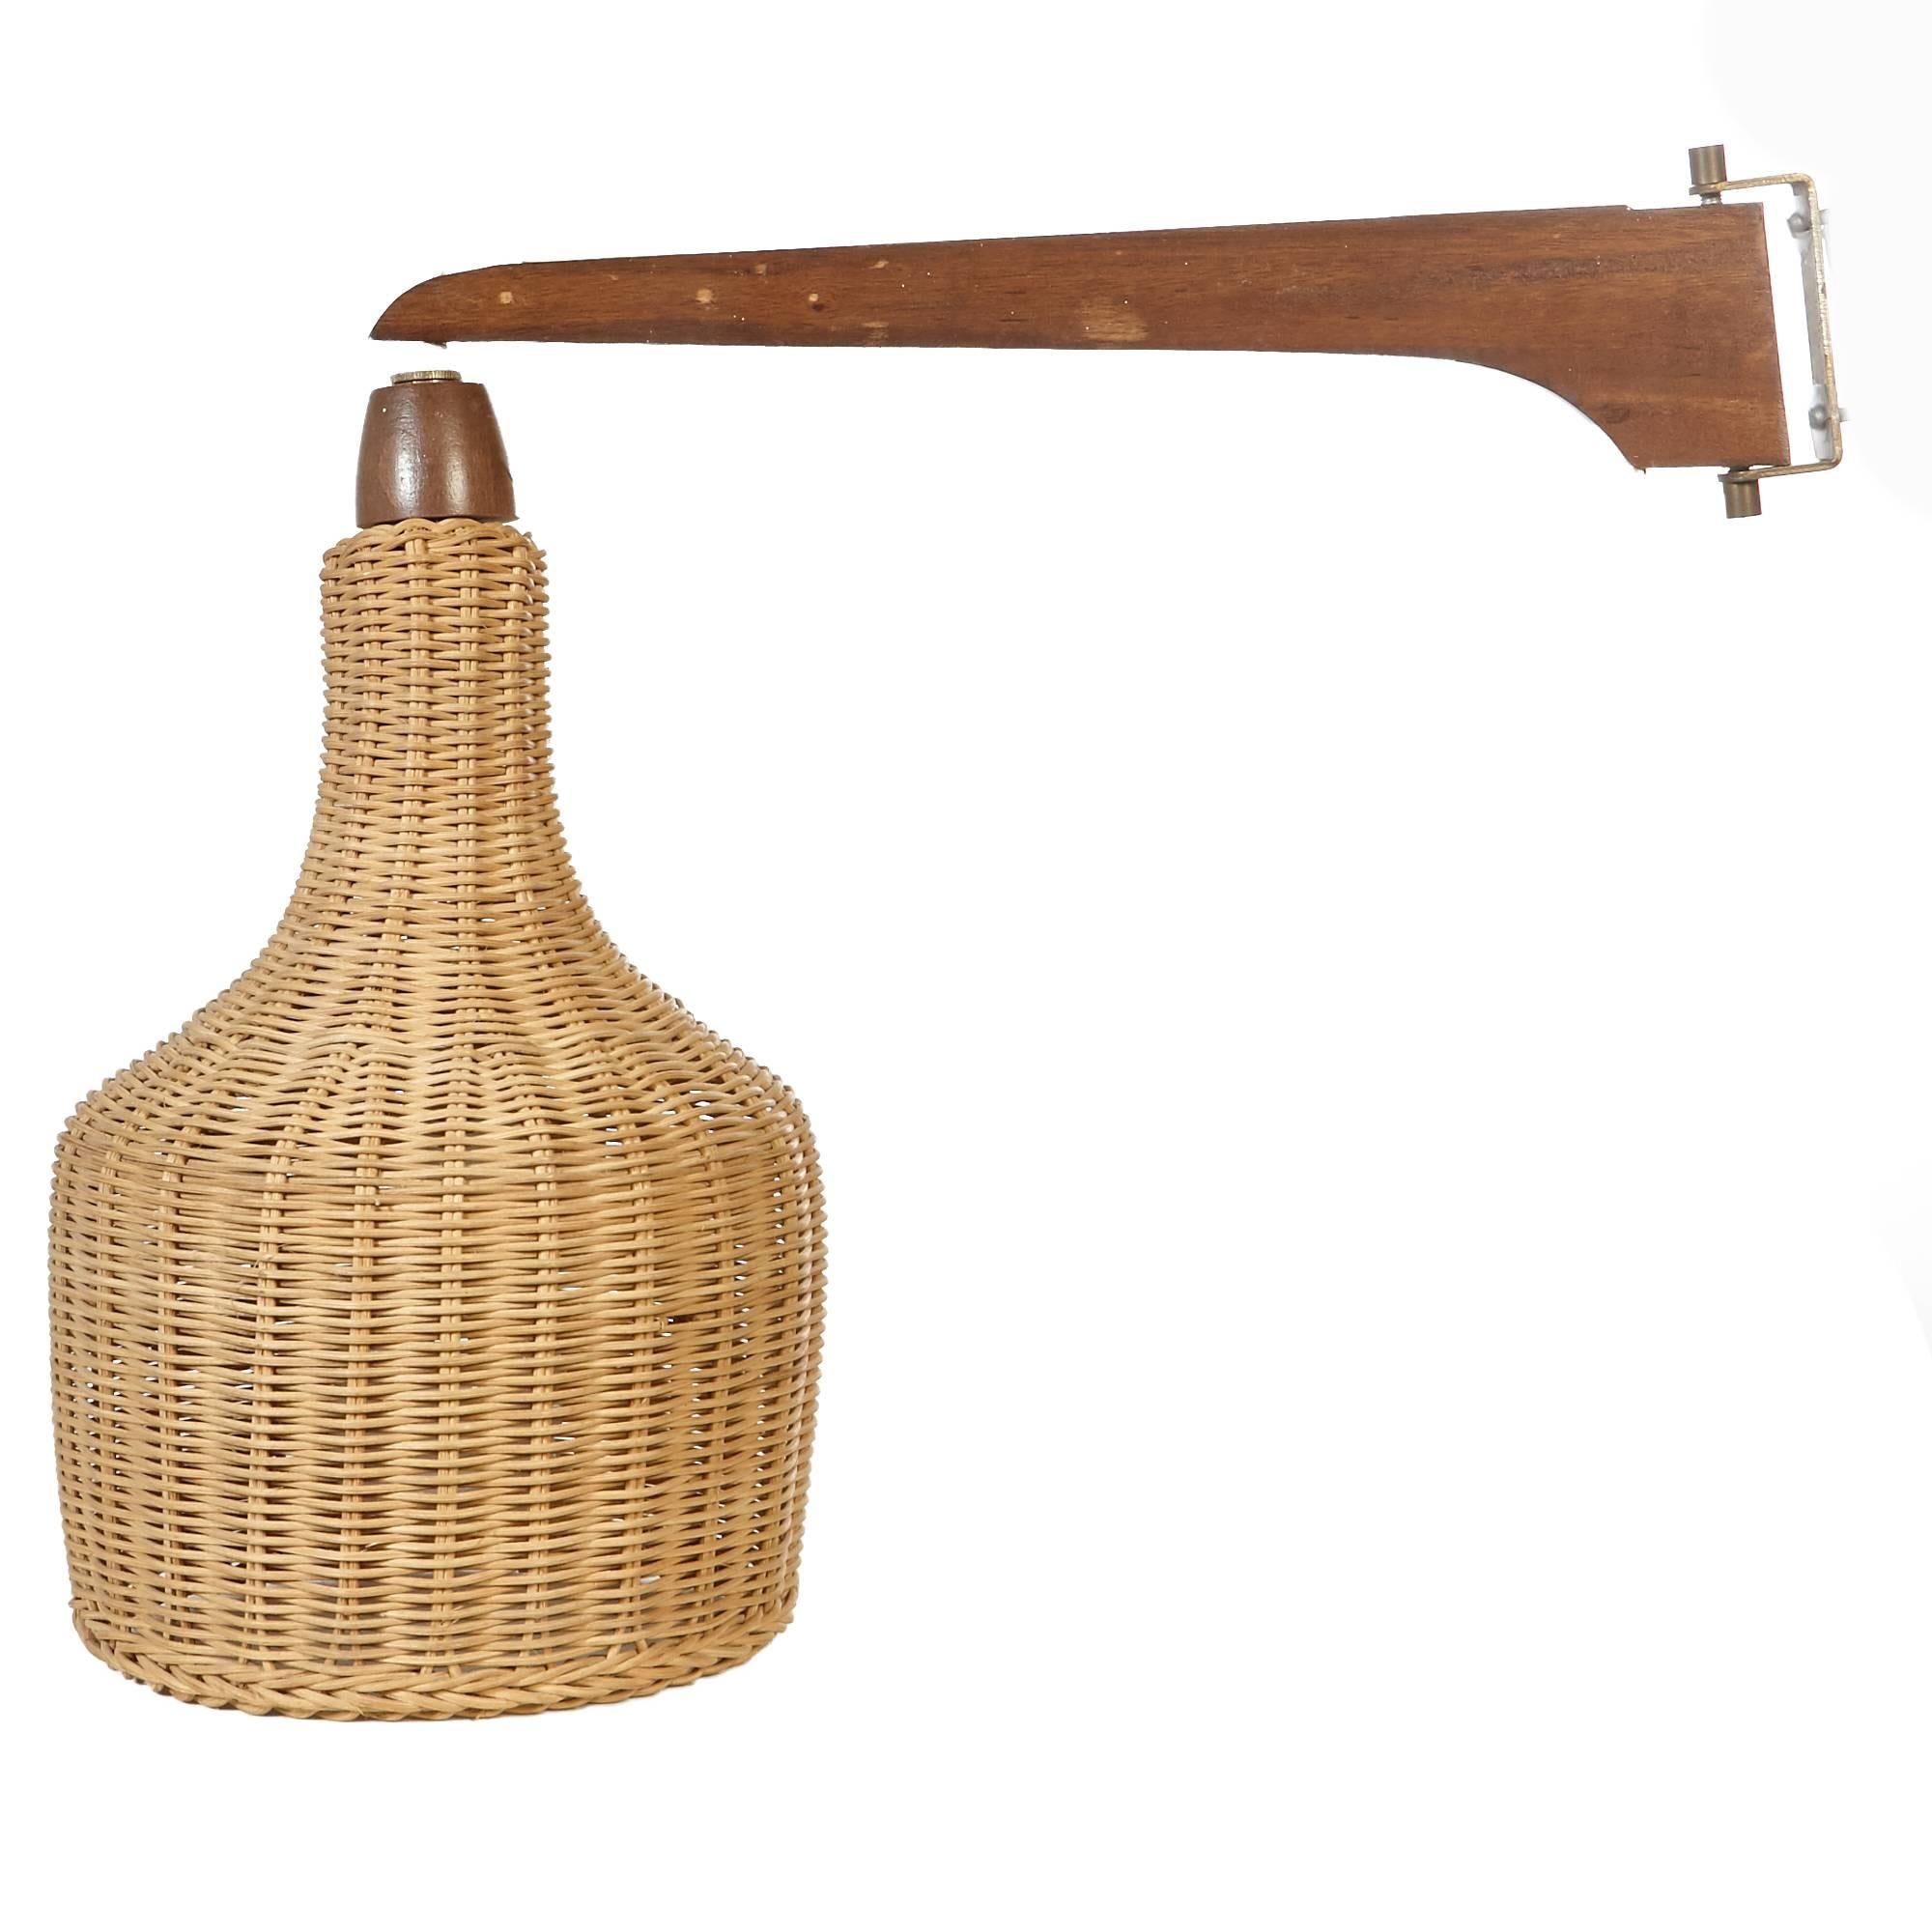 A large wall-mounted lamp with a wicker shade on an adjustable swing wooden arm. Plug is wired for the US and in working condition. Unmarked. One very small break in the wicker, not seen.